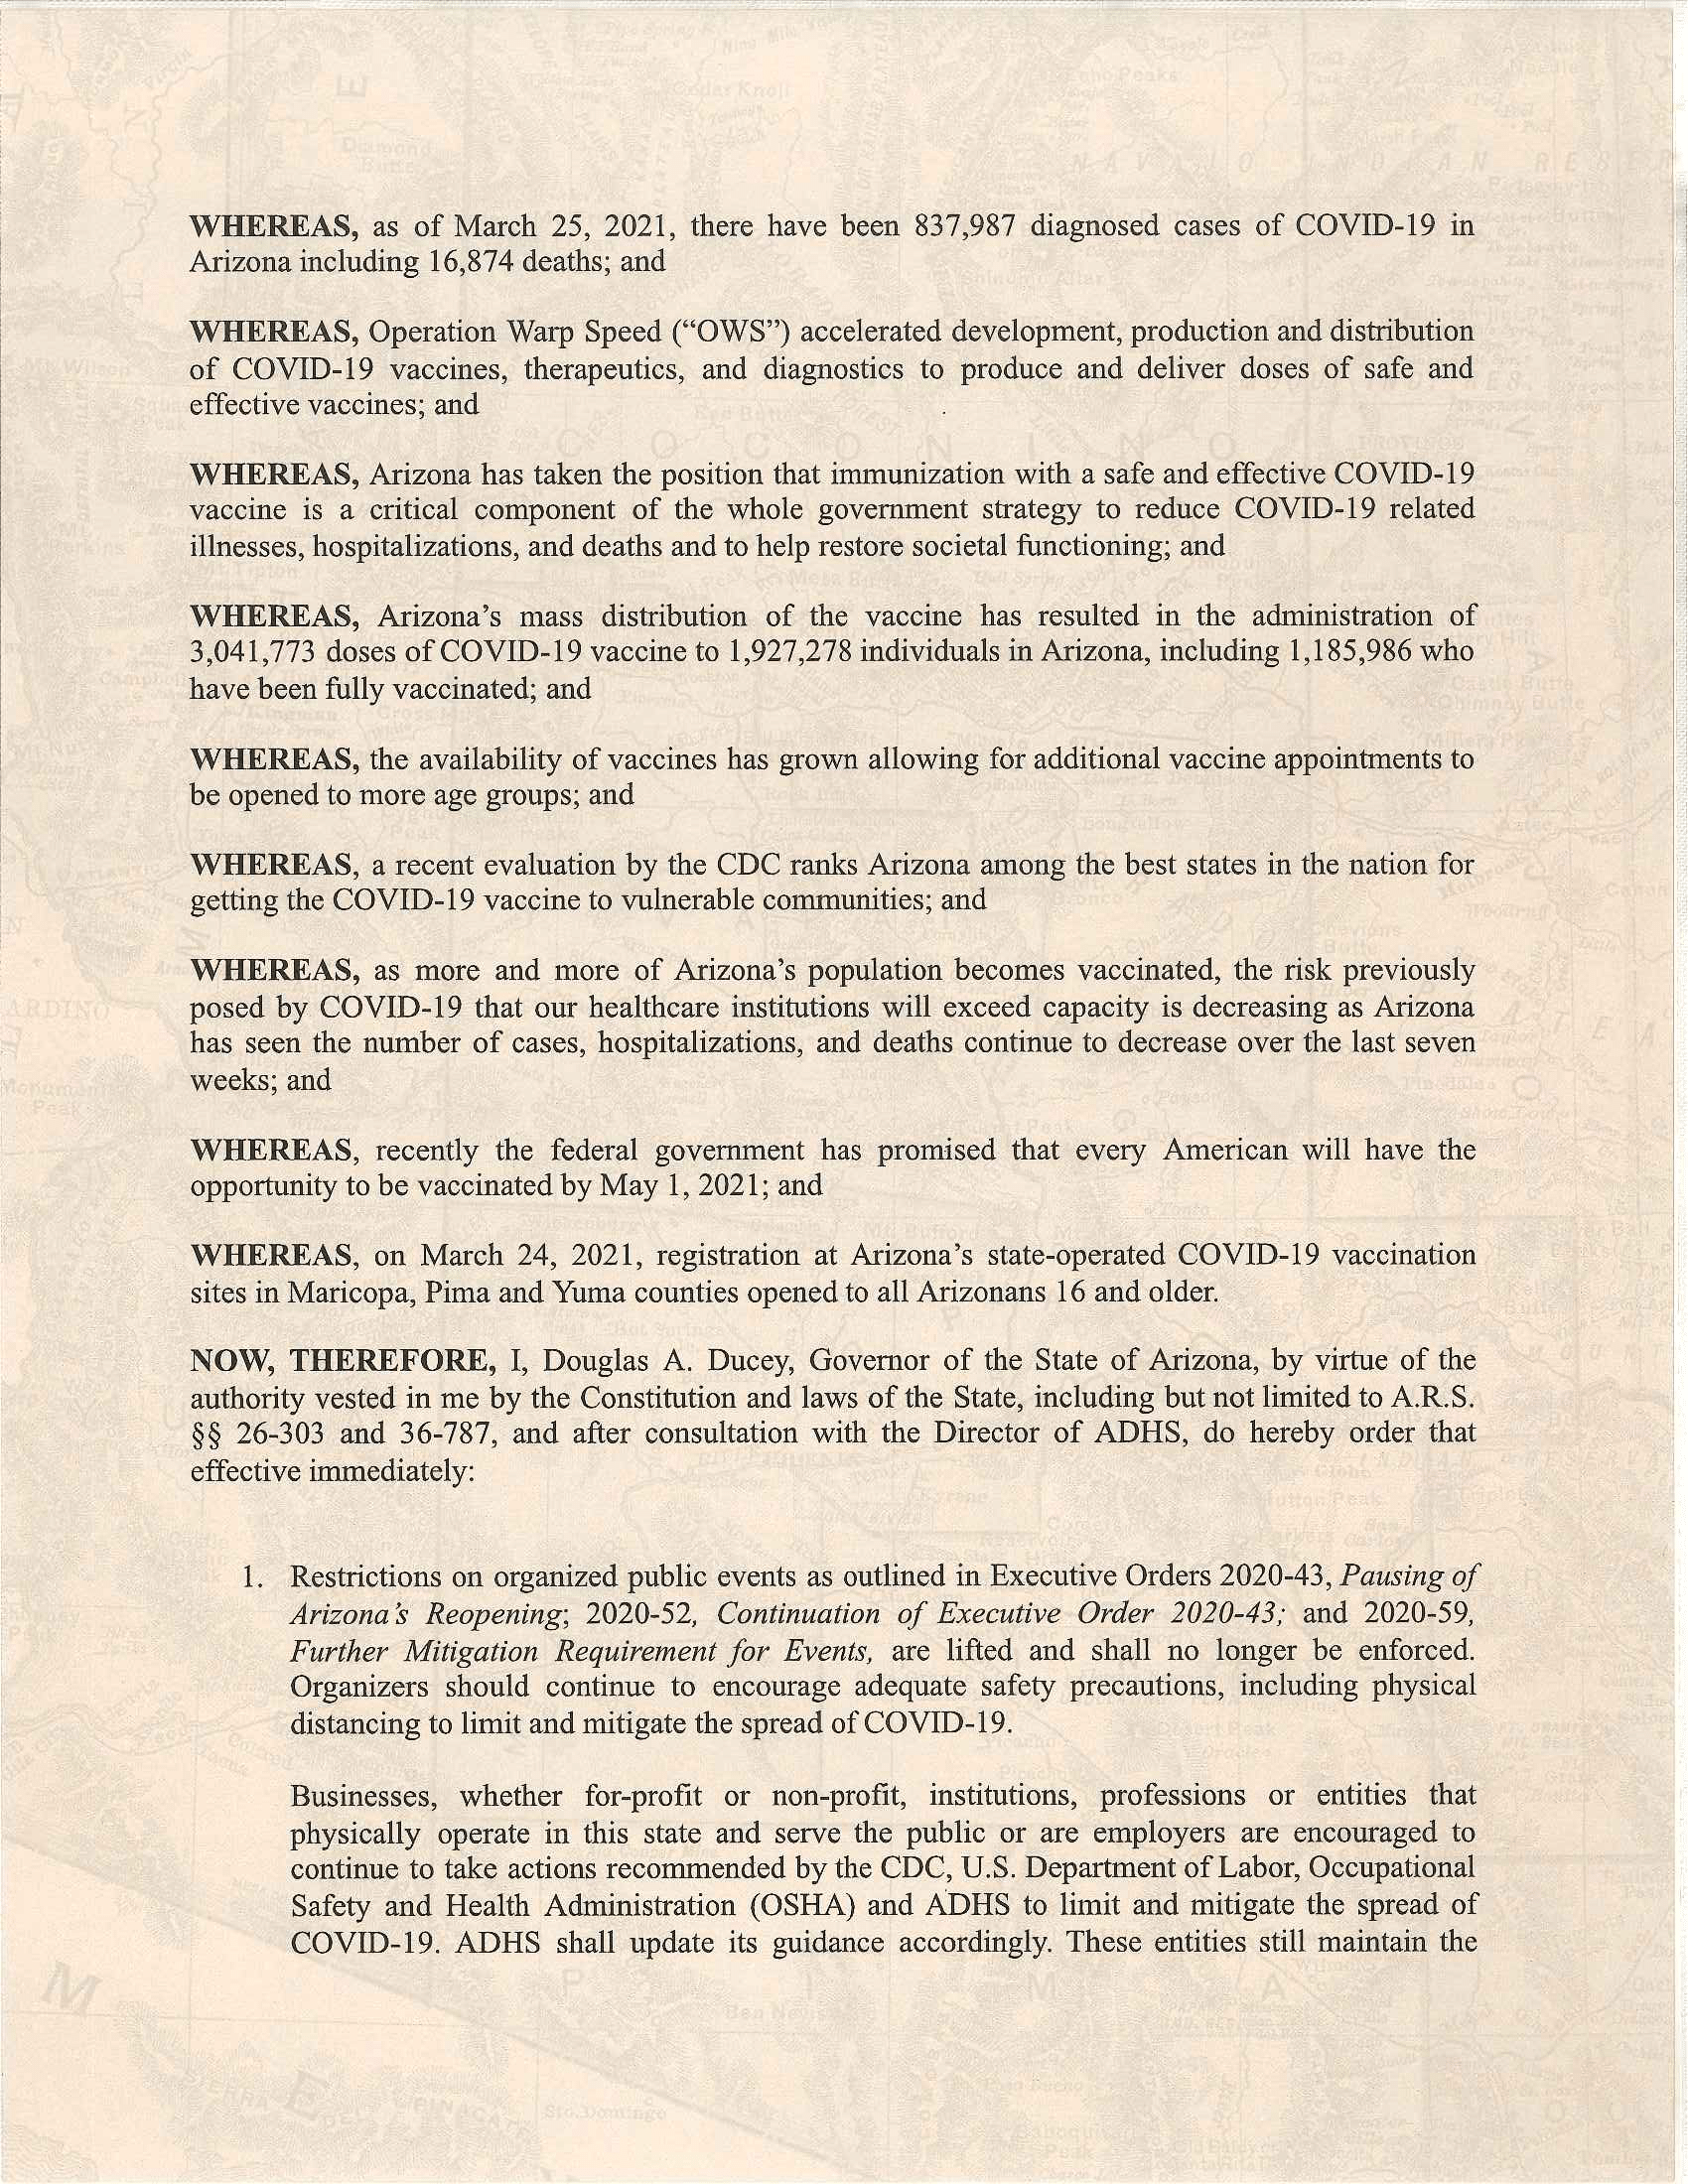 Page 2 of Doug Ducey's Executive Order 2021-06